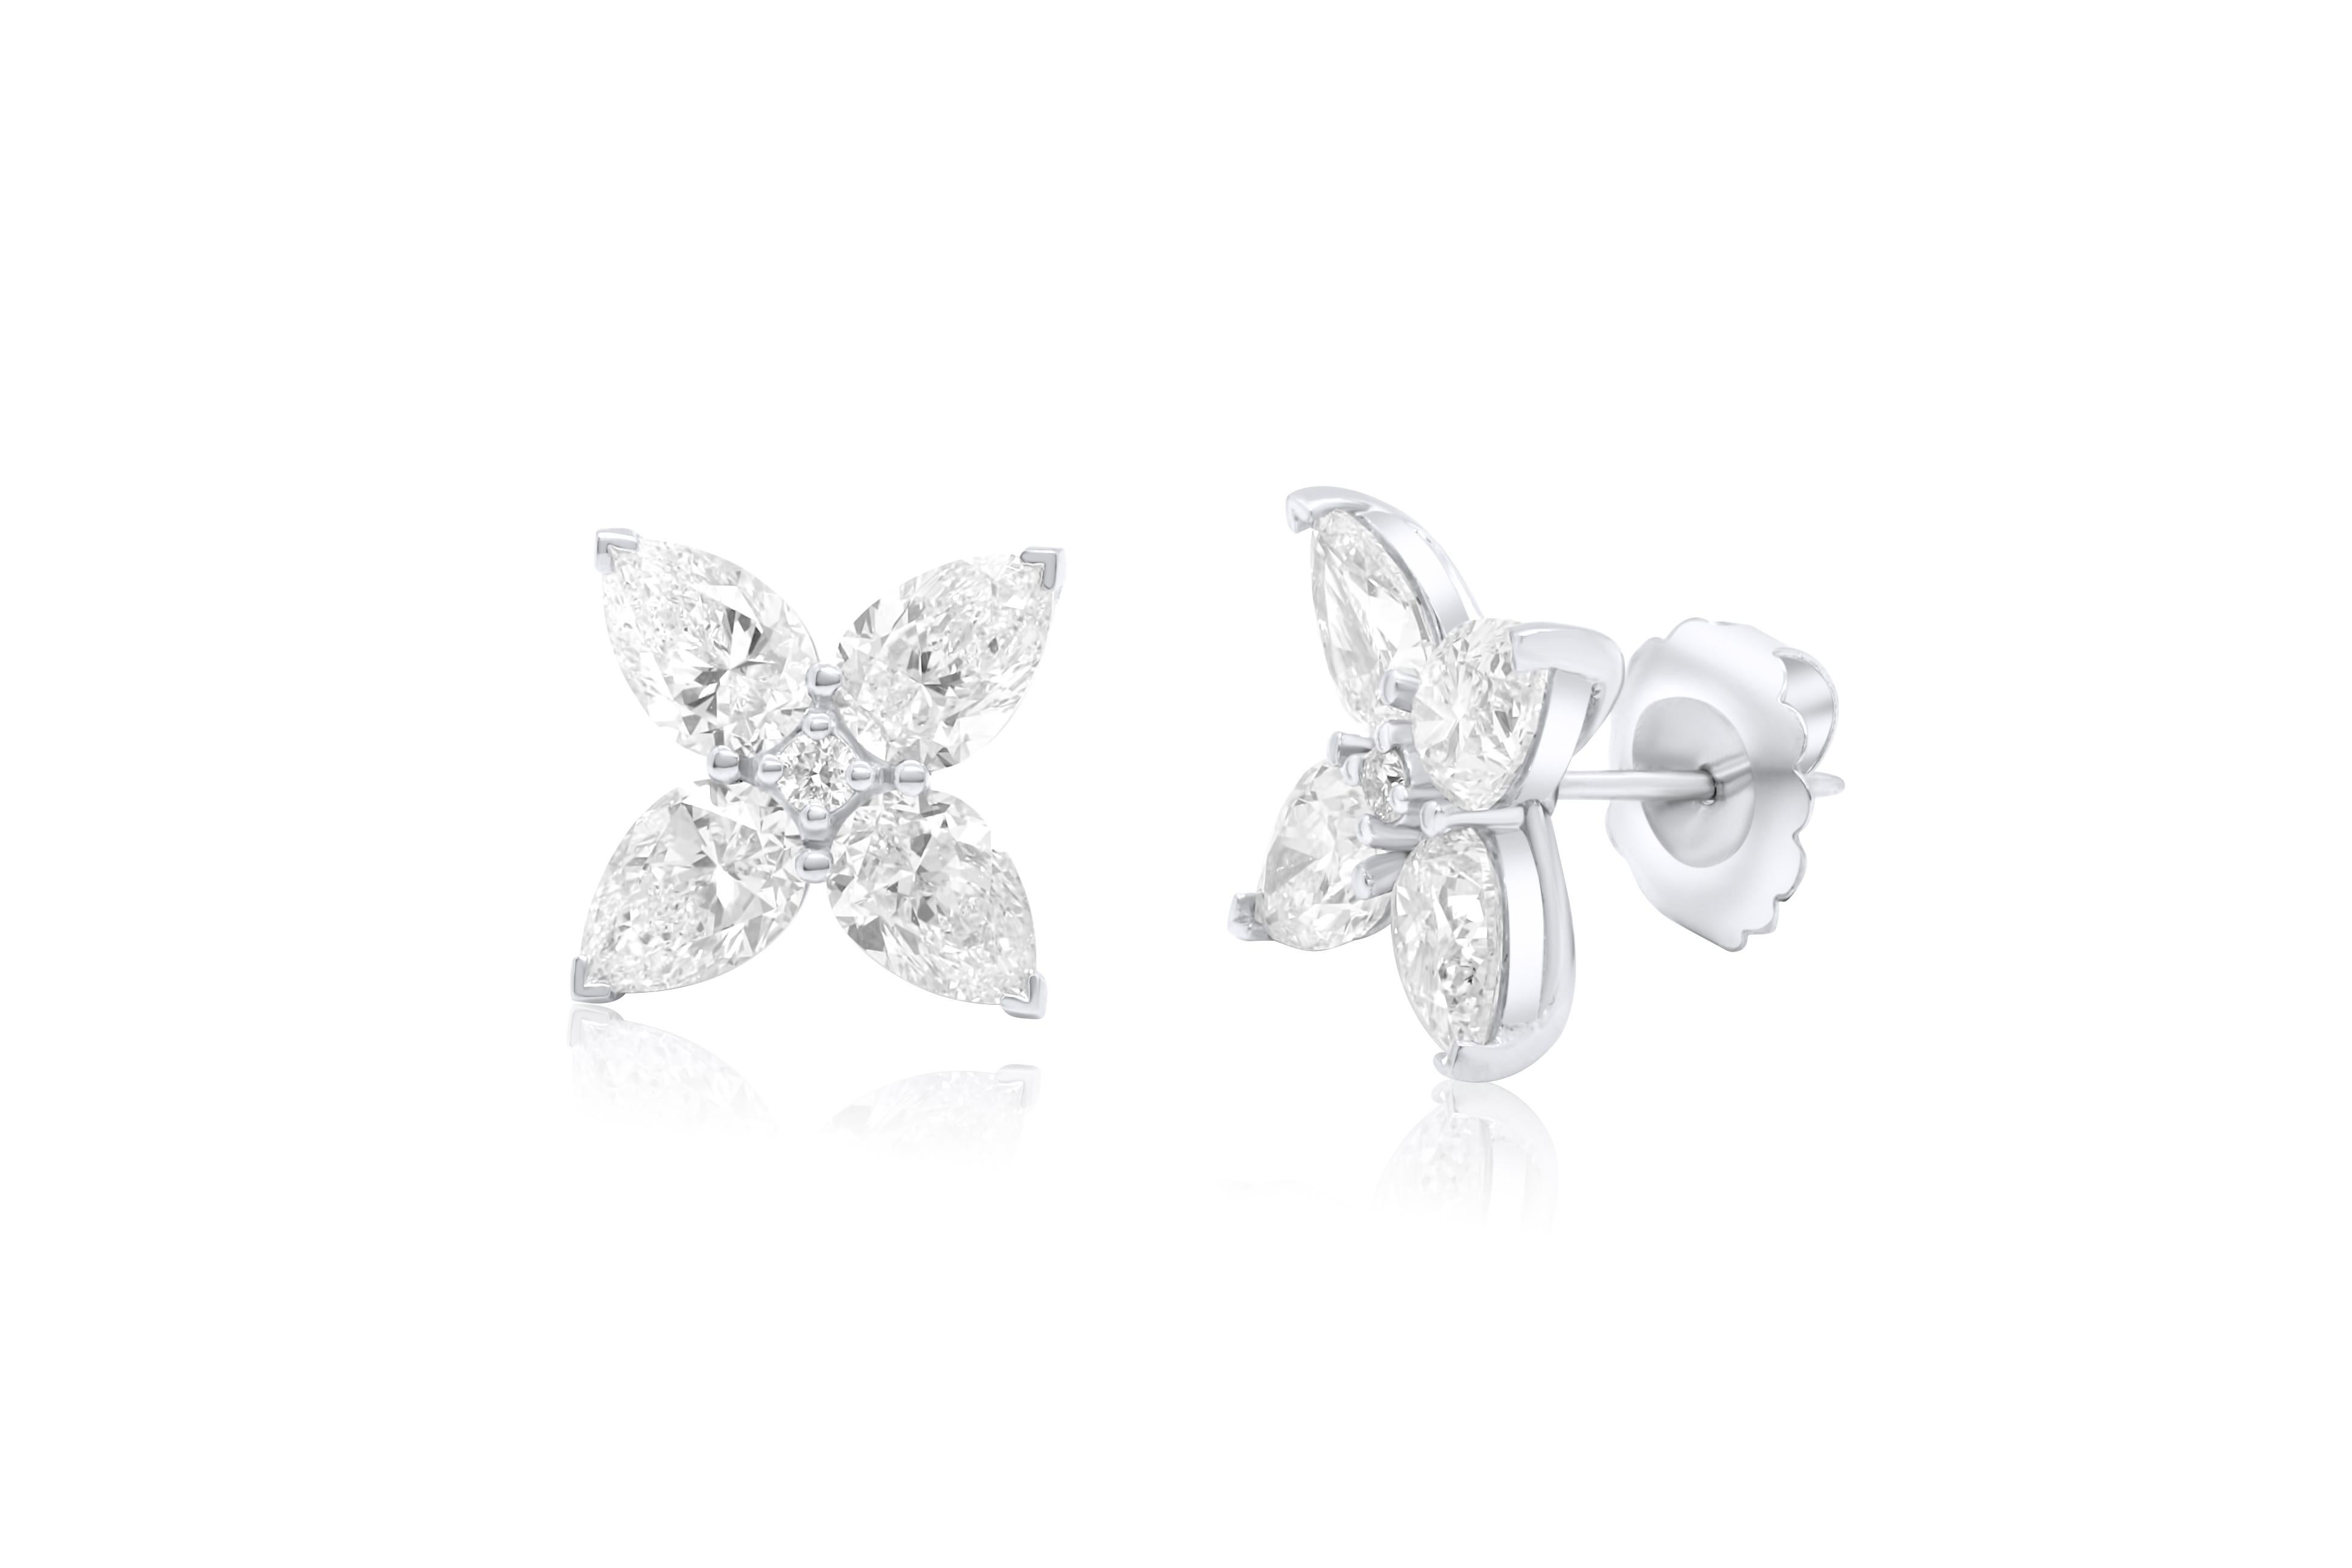 Platinum stud clover earrings adorned with 7.11 cts tw of pear shaped diamonds.
Diana M. is a leading supplier of top-quality fine jewelry for over 35 years.
Diana M is one-stop shop for all your jewelry shopping, carrying line of diamond rings,